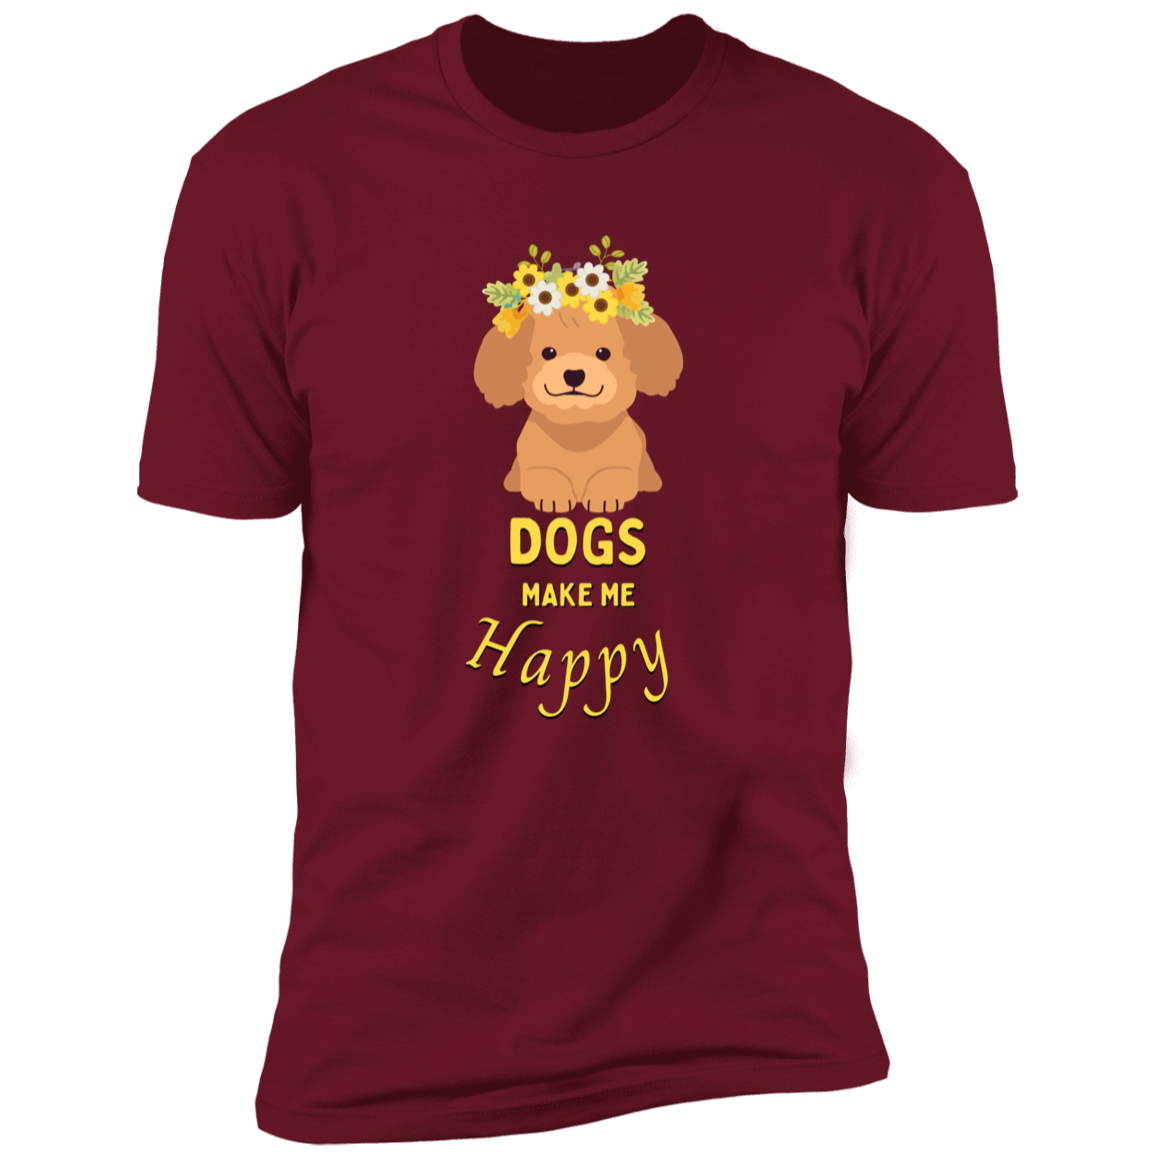 Dogs Make Me Happy t-shirt, funny dog shirt for humans, in cardinal red